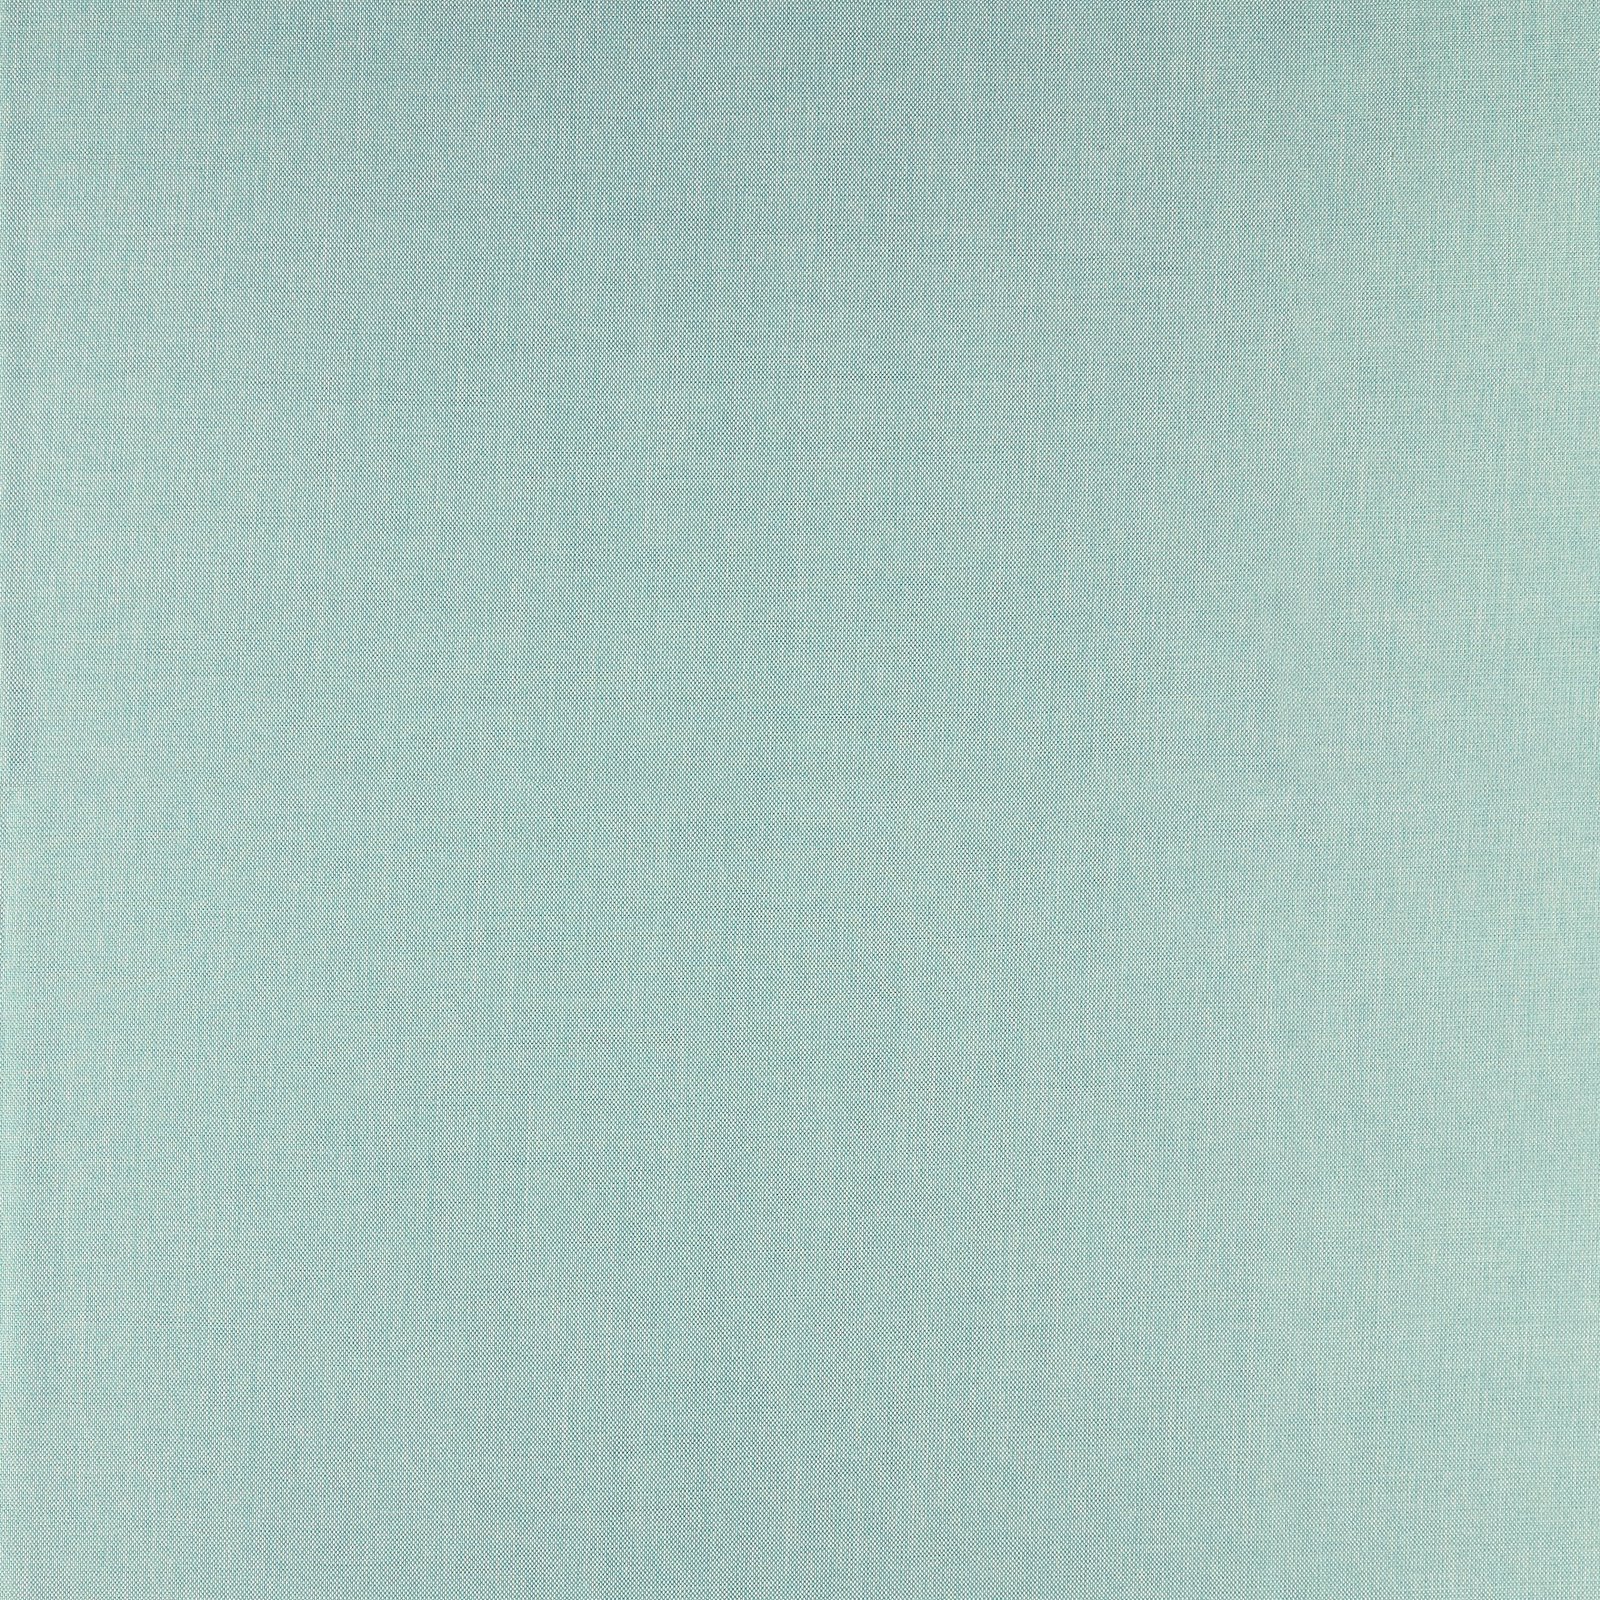 Upholstery fabric baby light blue mel 826594_pack_solid